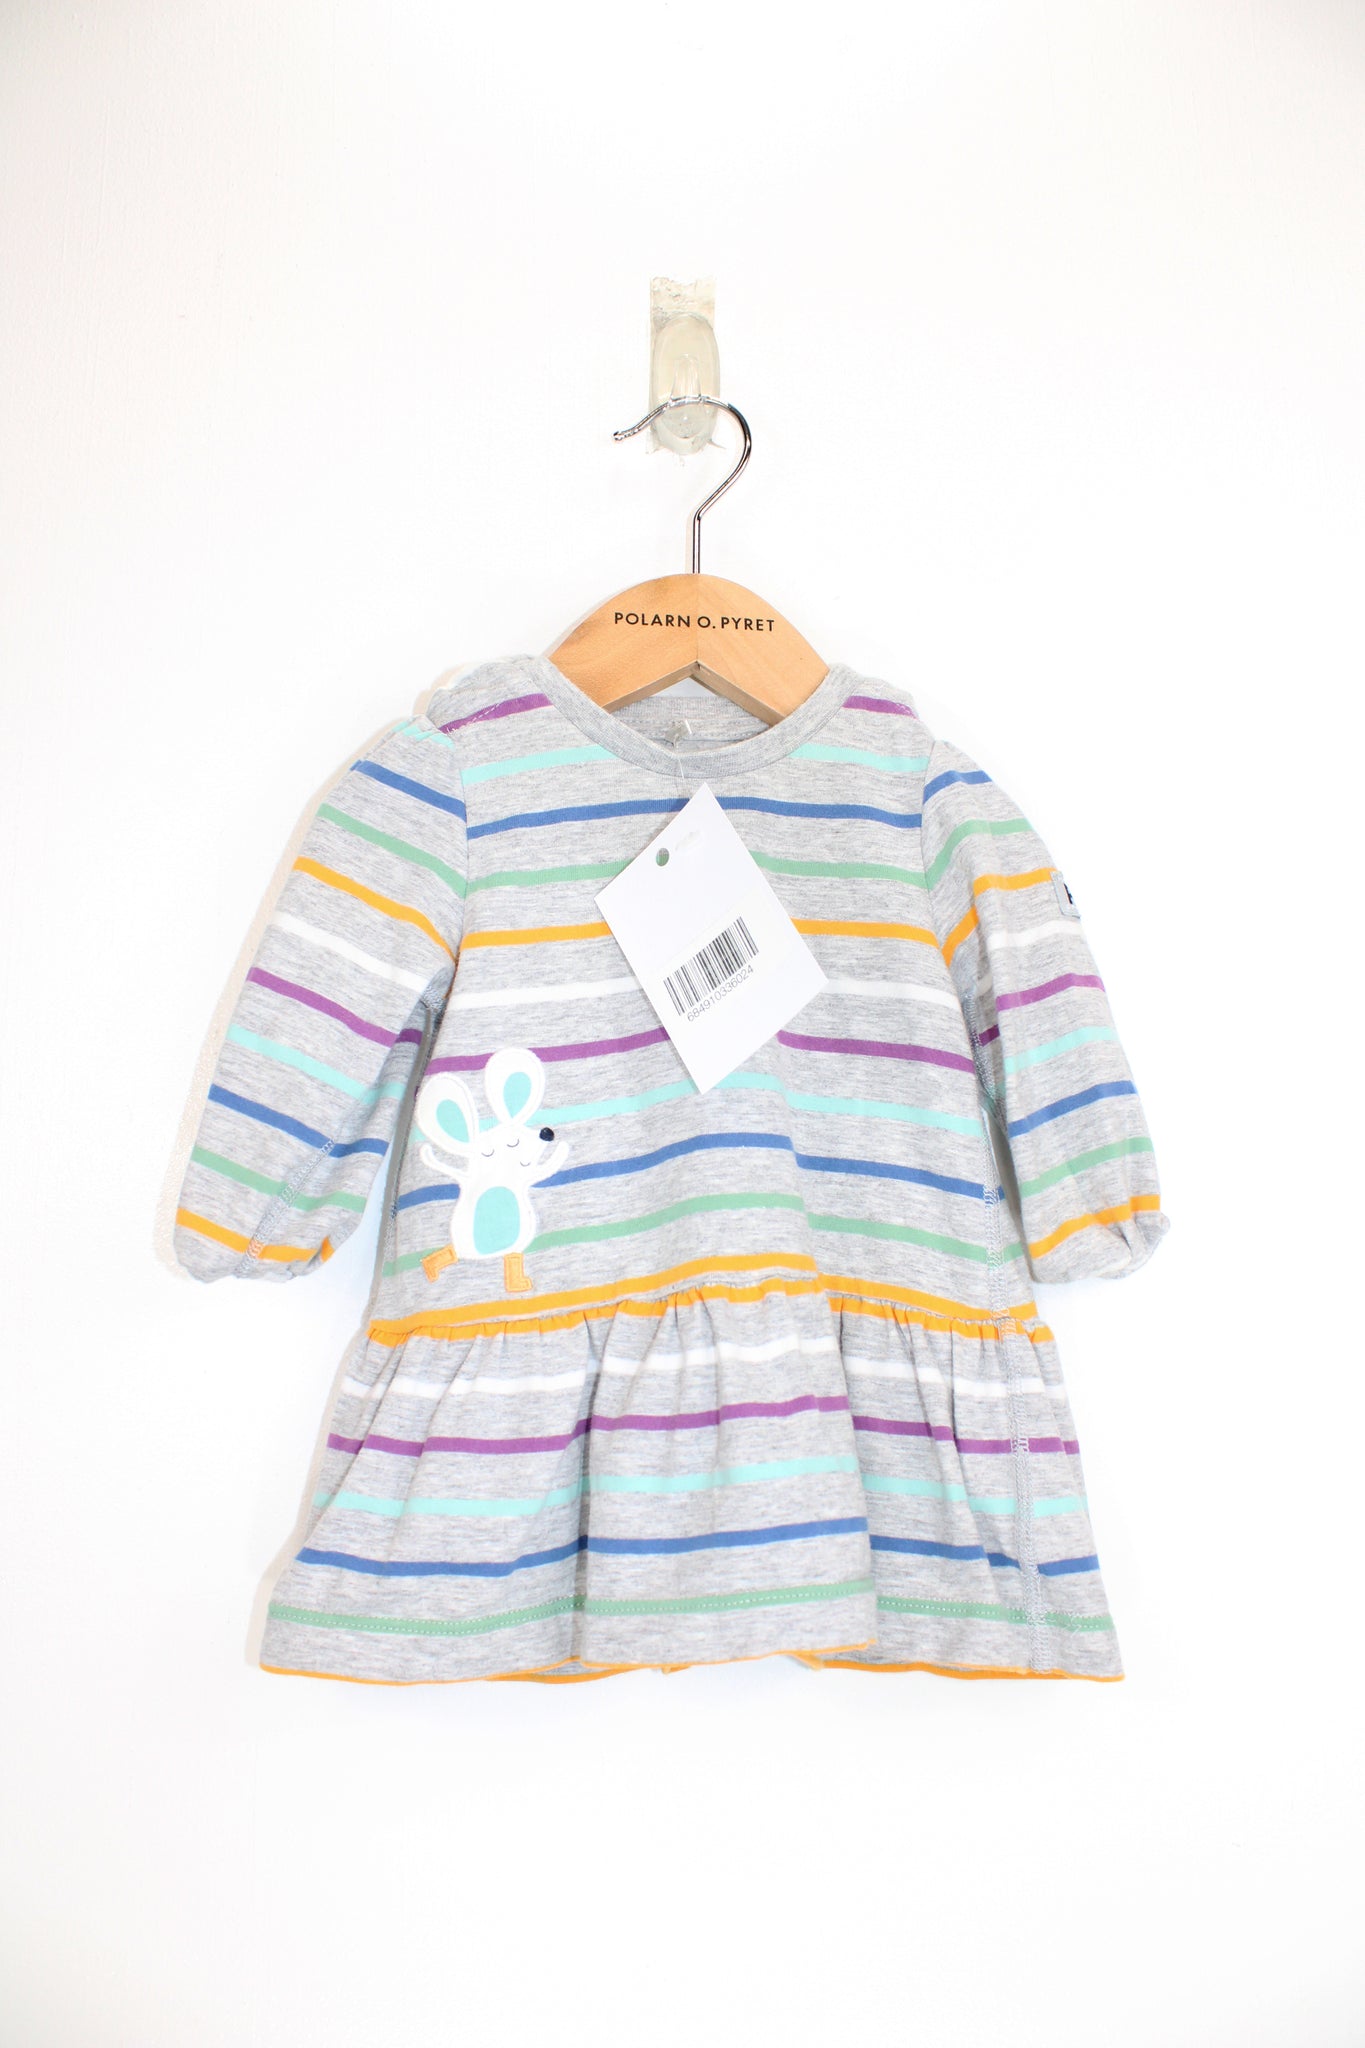 Baby Long Sleeved Top 1-2m / 56